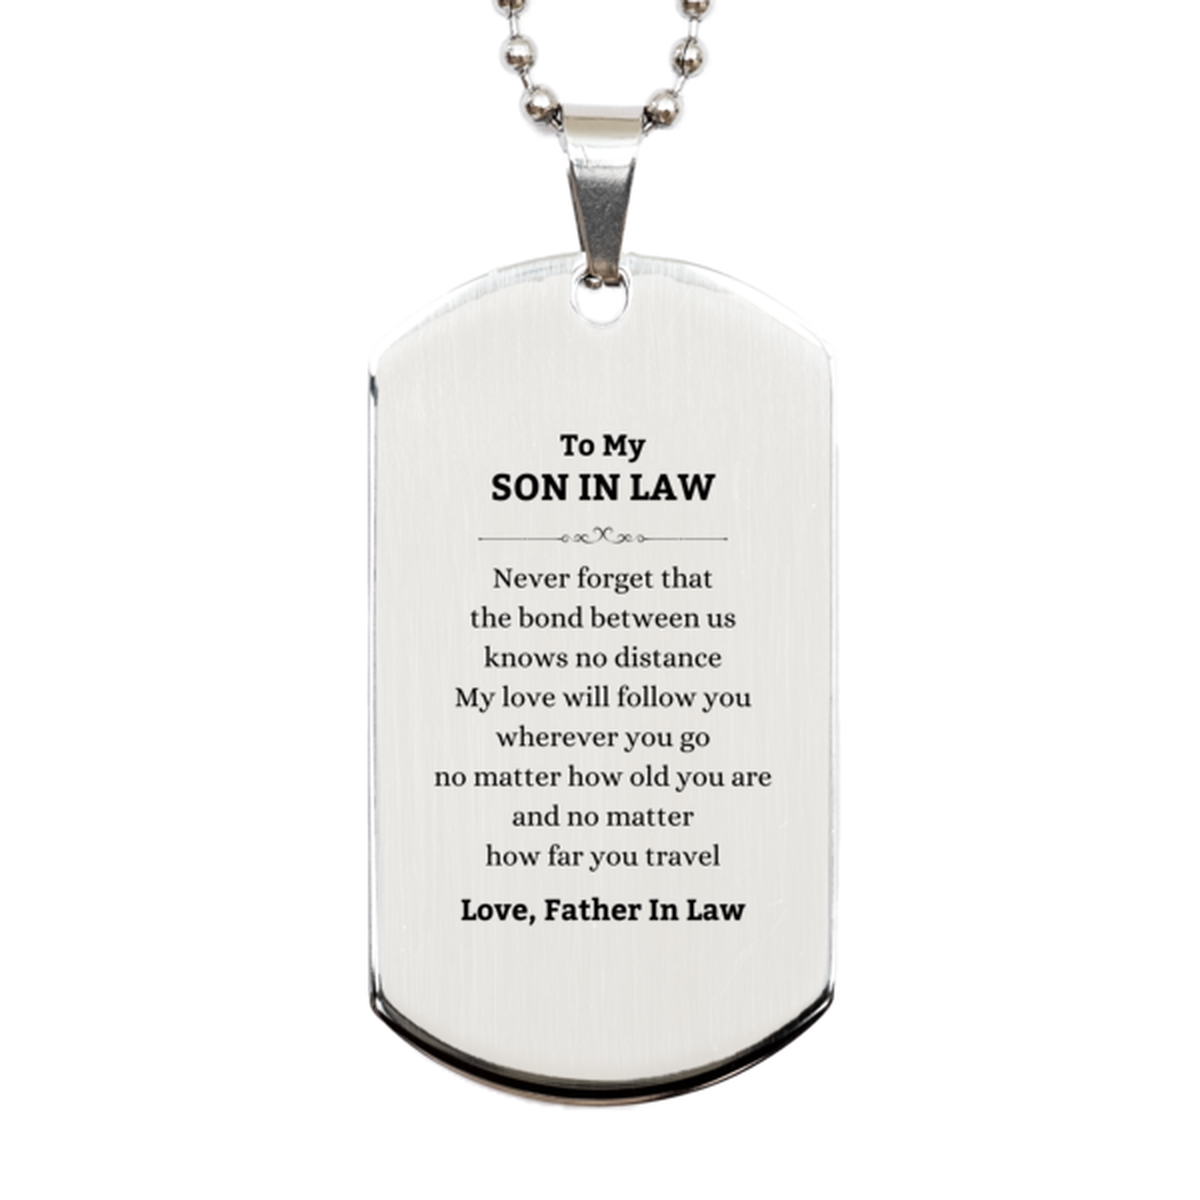 Son In Law Birthday Gifts from Father In Law, Adjustable Silver Dog Tag for Son In Law Christmas Graduation Unique Gifts Son In Law Never forget that the bond between us knows no distance. Love, Father In Law